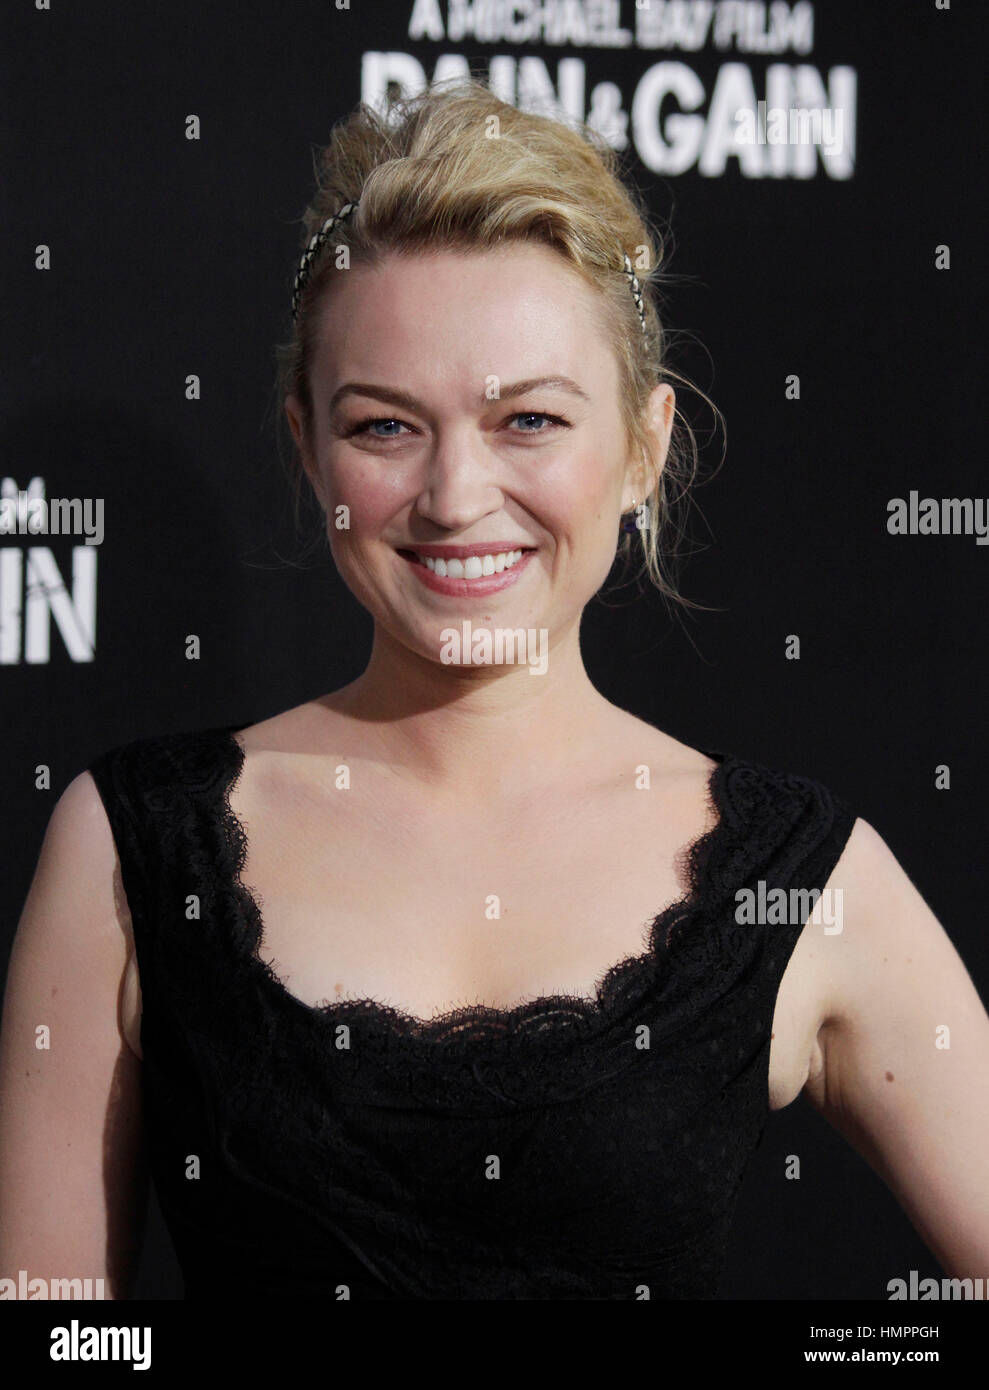 Sophia Myles arrives for the premiere of the film, 'Pain & Gain' on April 22, 2013, in Hollywood, California. Photo by Francis Specker Stock Photo